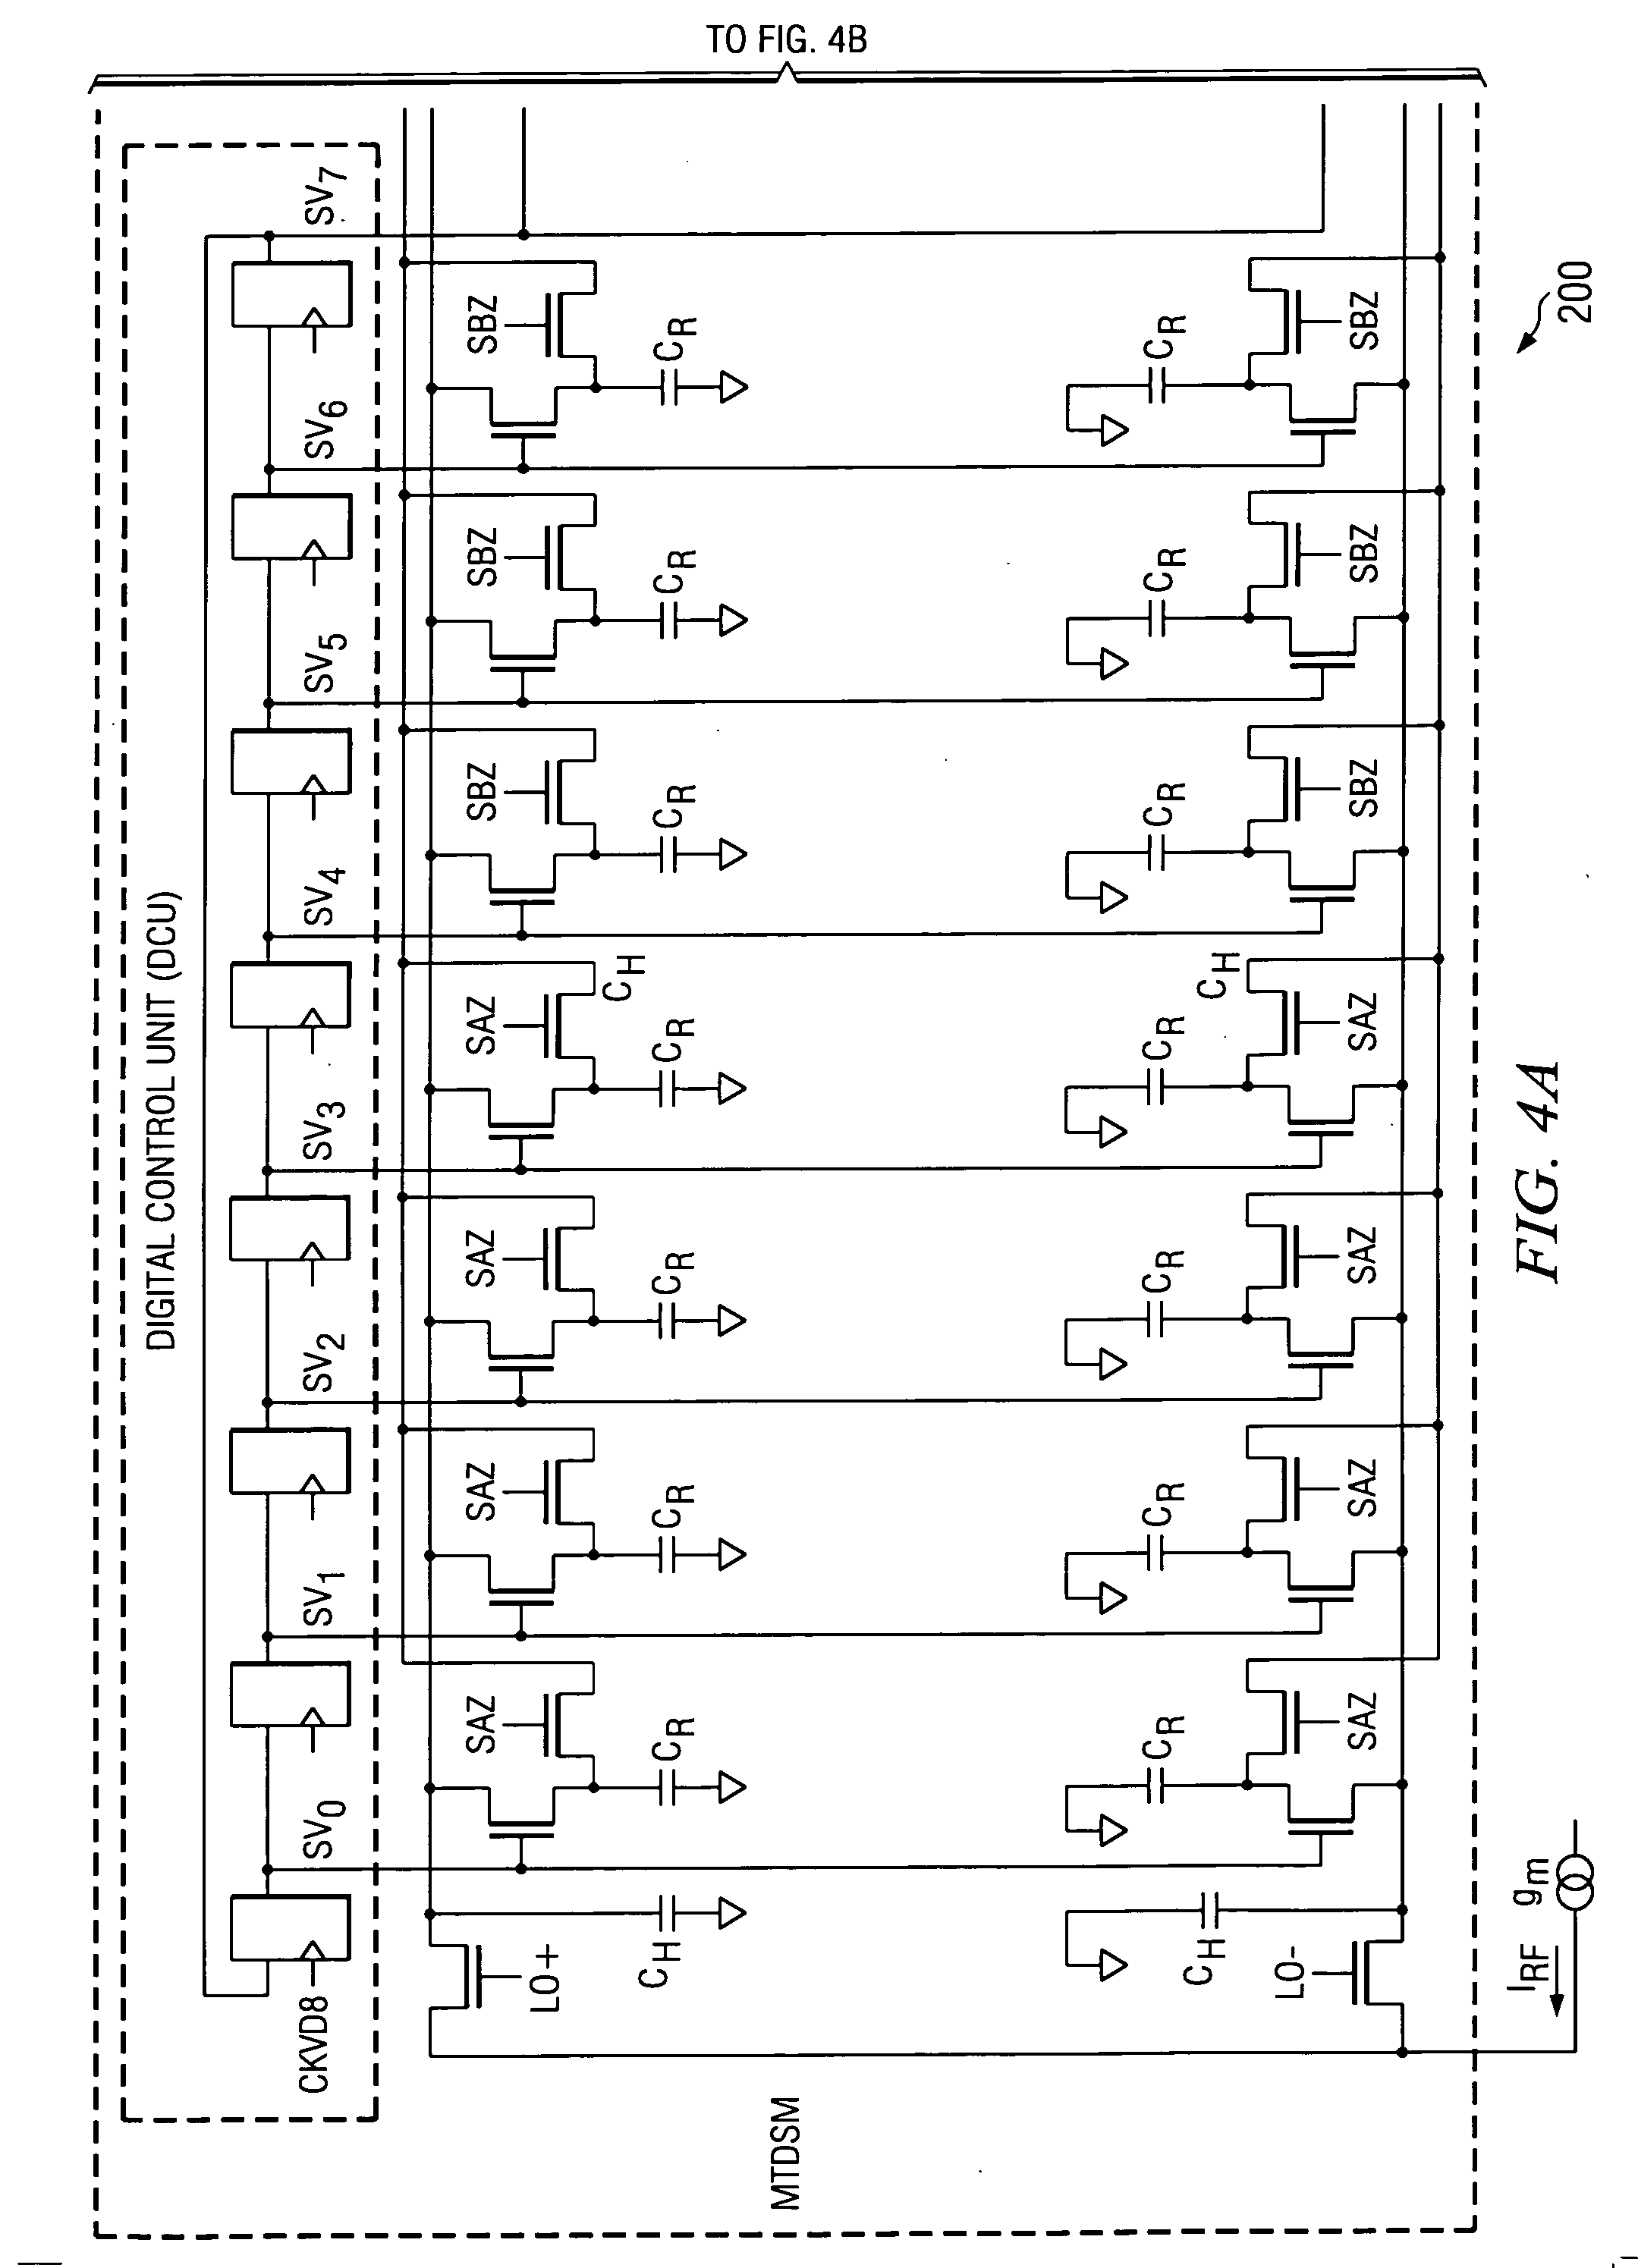 Technique for improving antialiasing and adjacent channel interference filtering using cascaded passive IIR filter stages combined with direct sampling and mixing